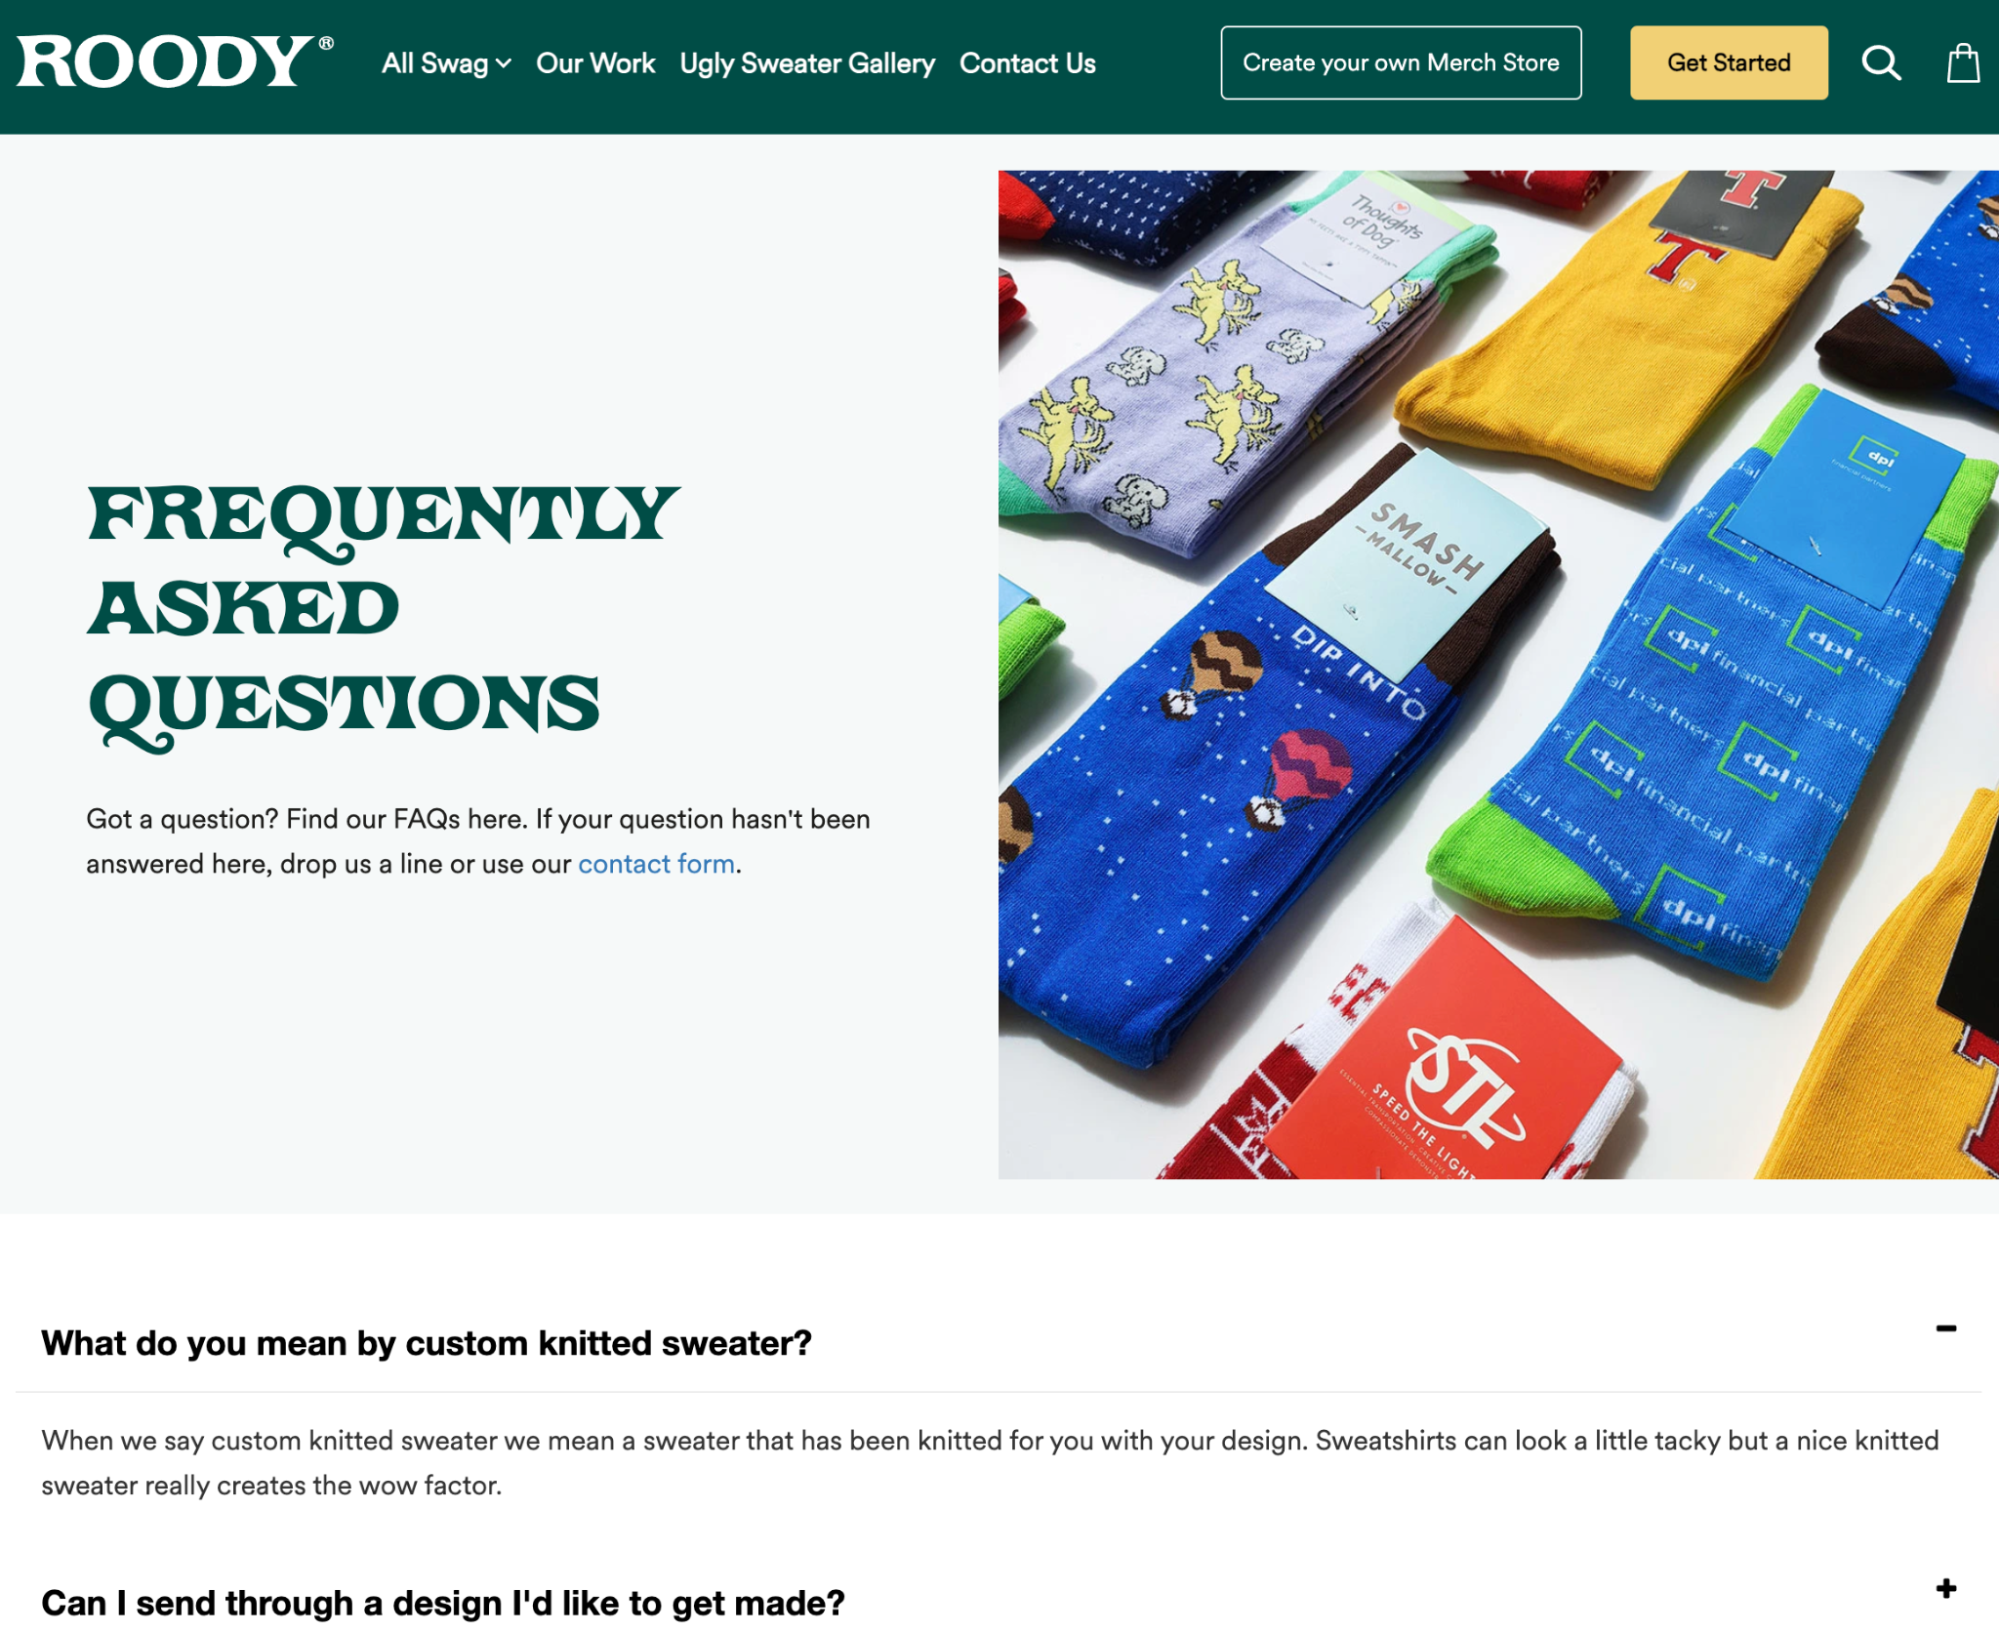 Roody’s FAQ page with a product image and product information written in a casual brand voice.